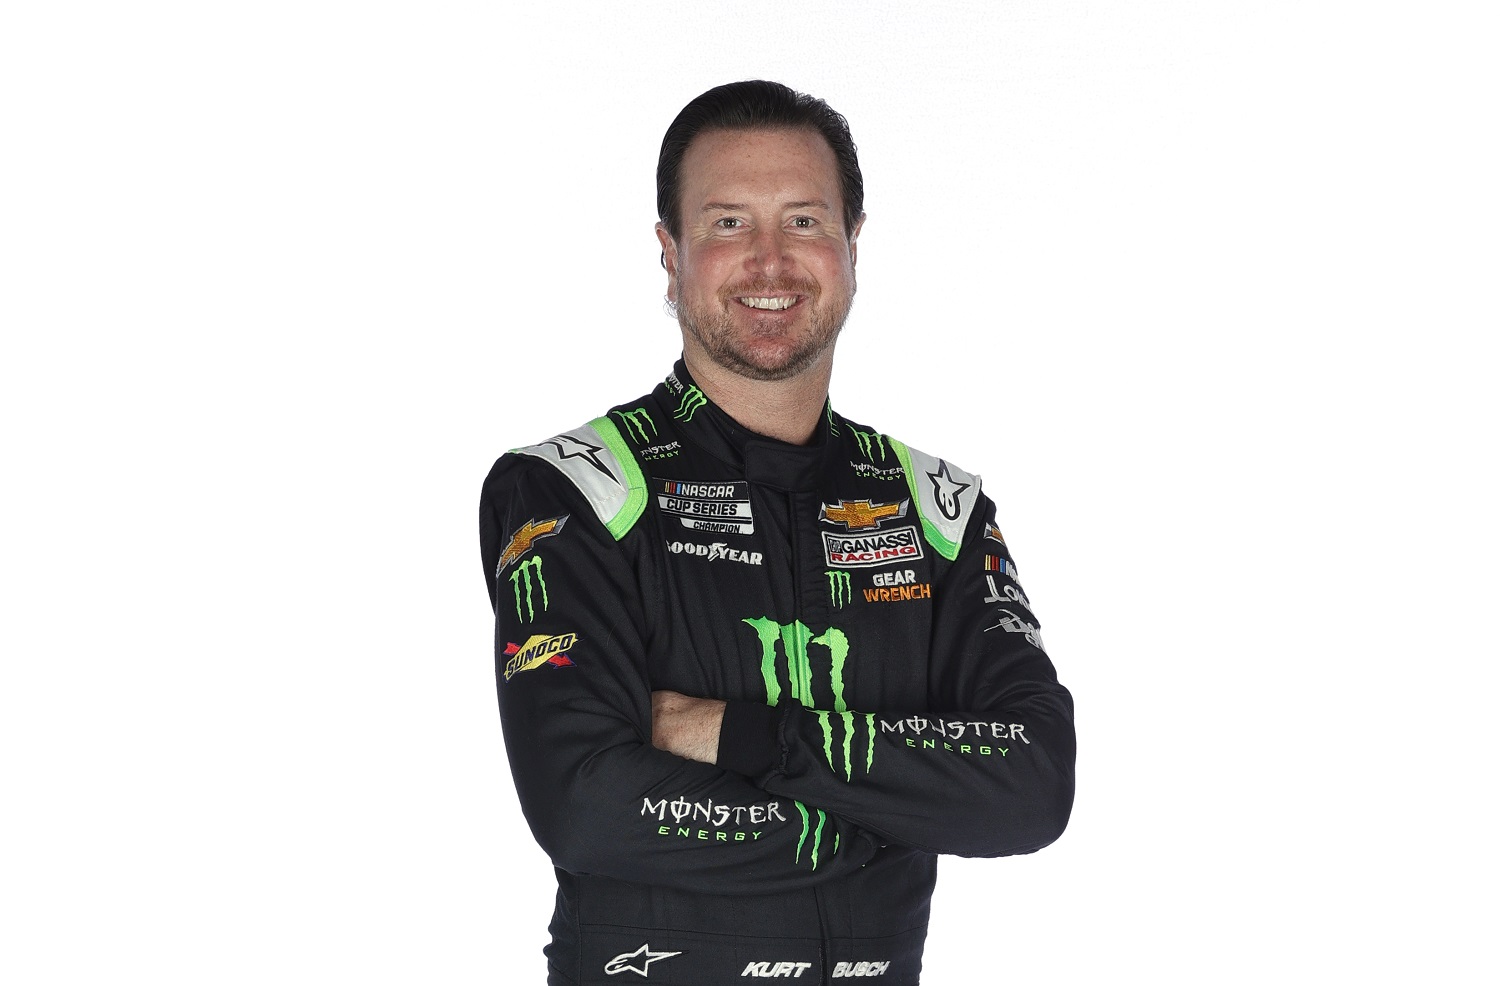 Kurt Busch has driven for numerous top teams in a NASCAR Cup Series career that began in 2000. The move to 23XI Racing this offseason means another fresh start. | Chris Graythen/Getty Images